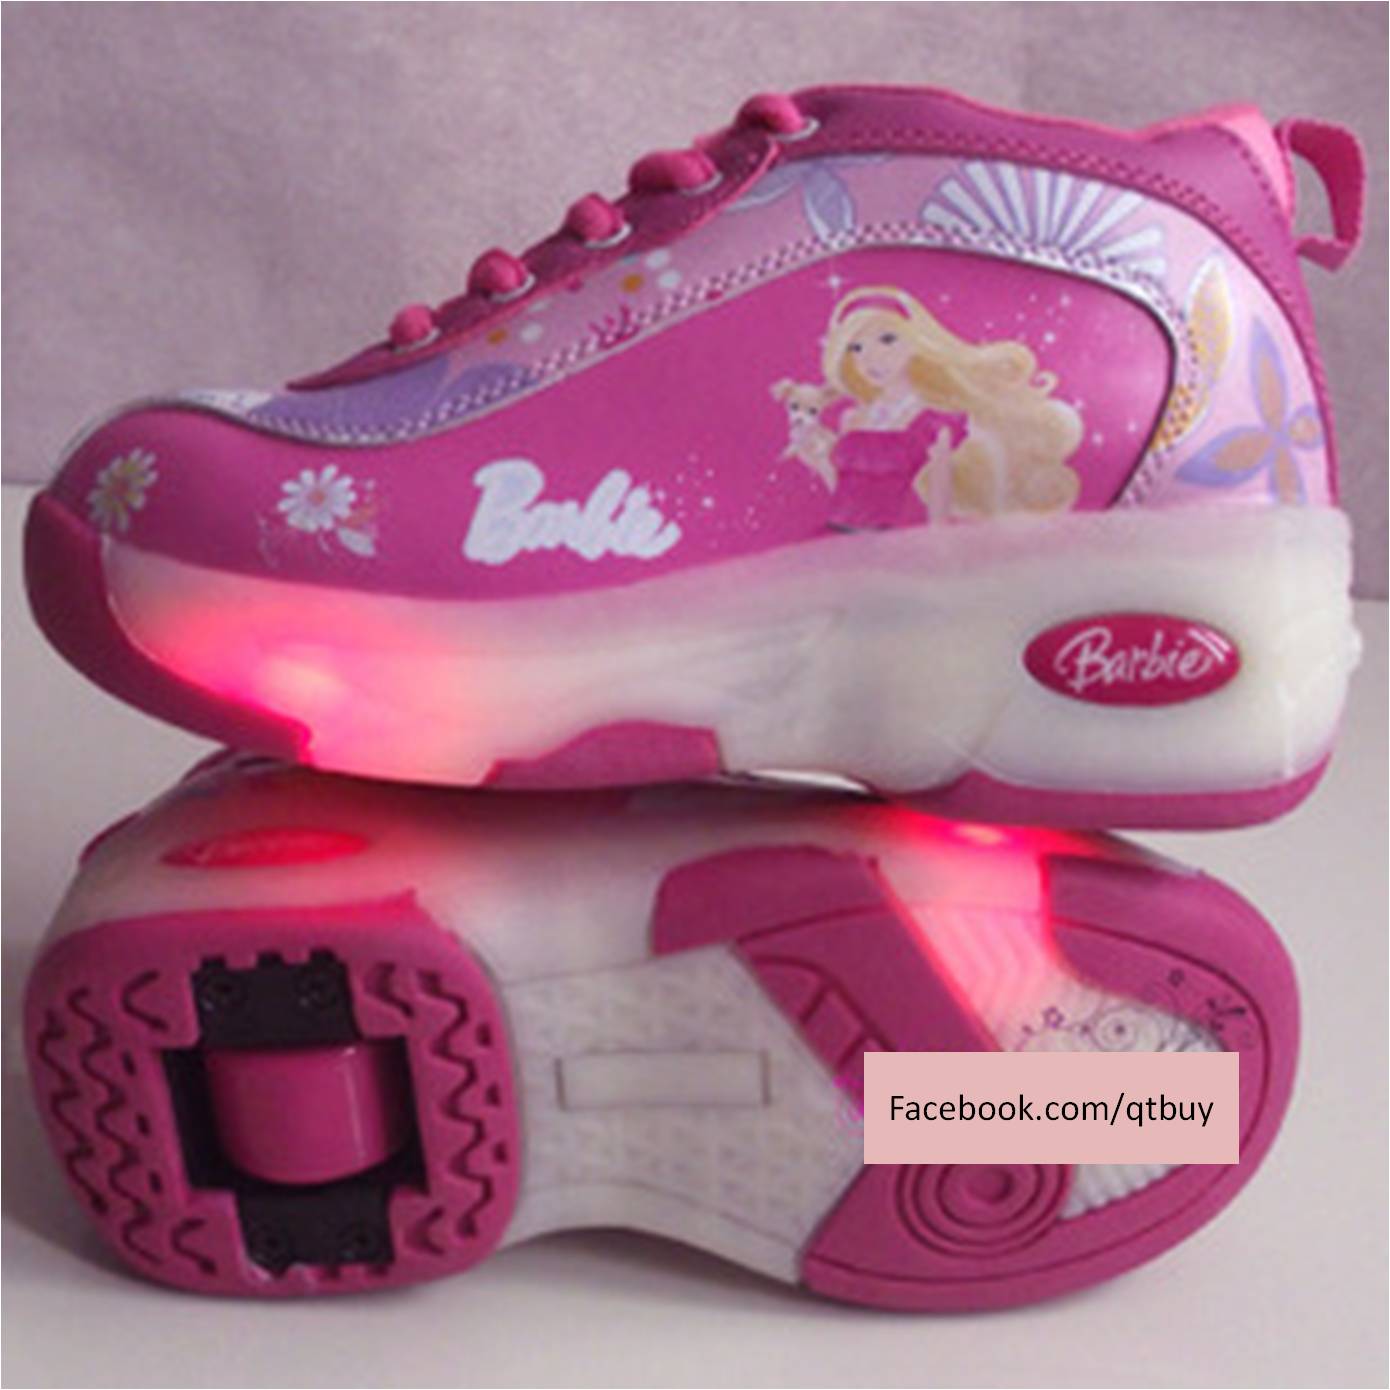 Barbie Shoes For Adults 6